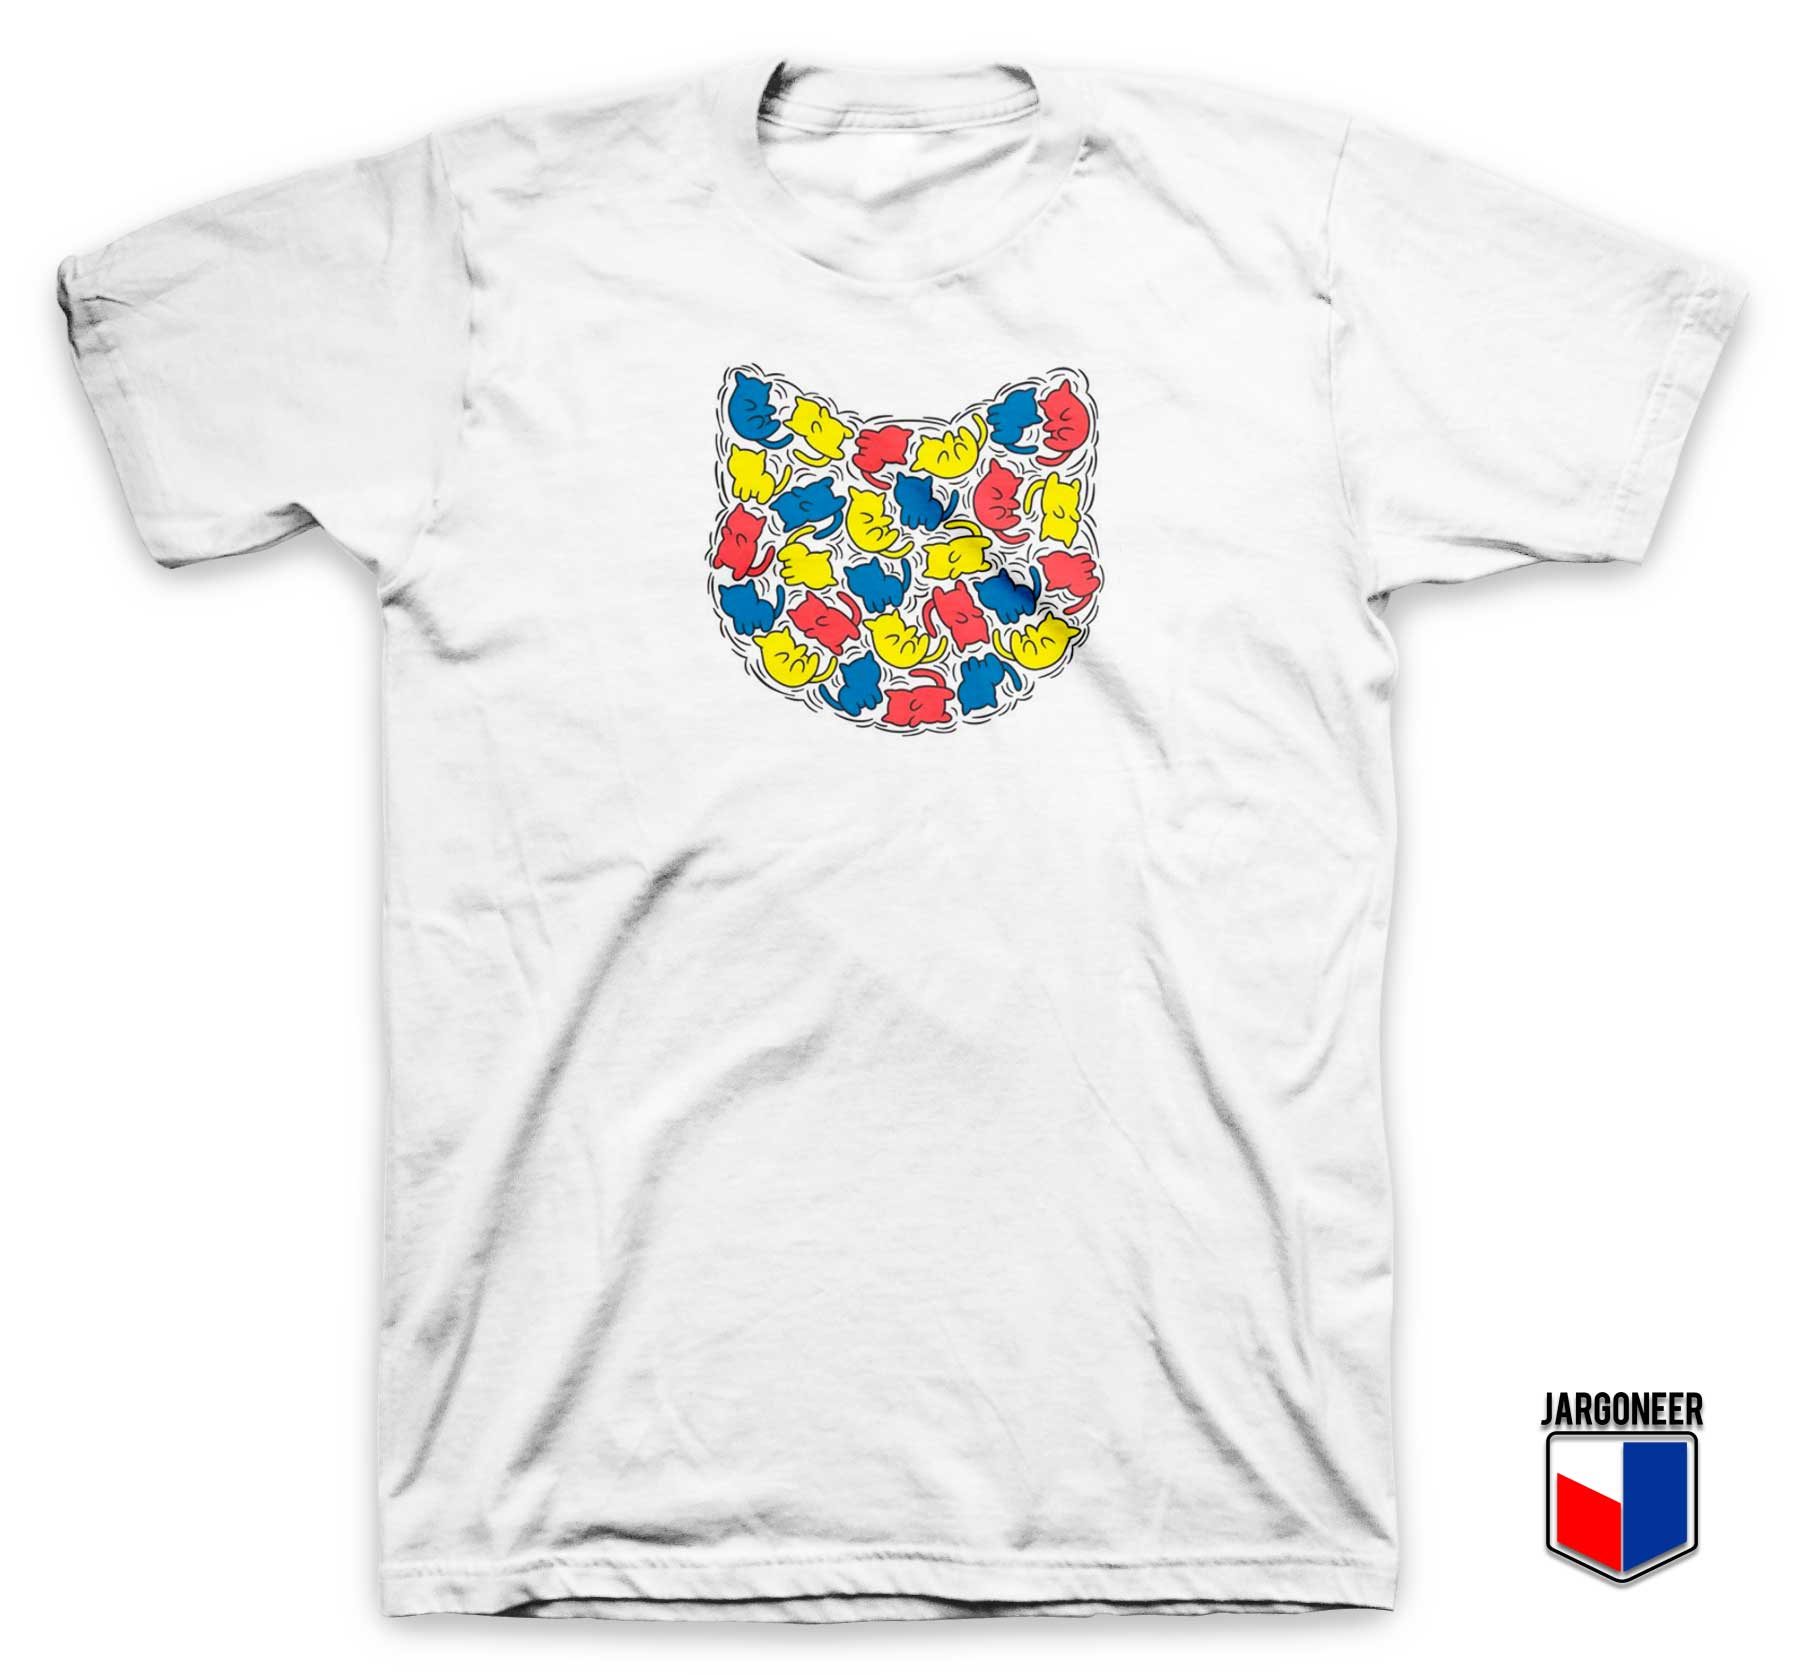 Keith Kitty Haring T Shirt - Shop Unique Graphic Cool Shirt Designs